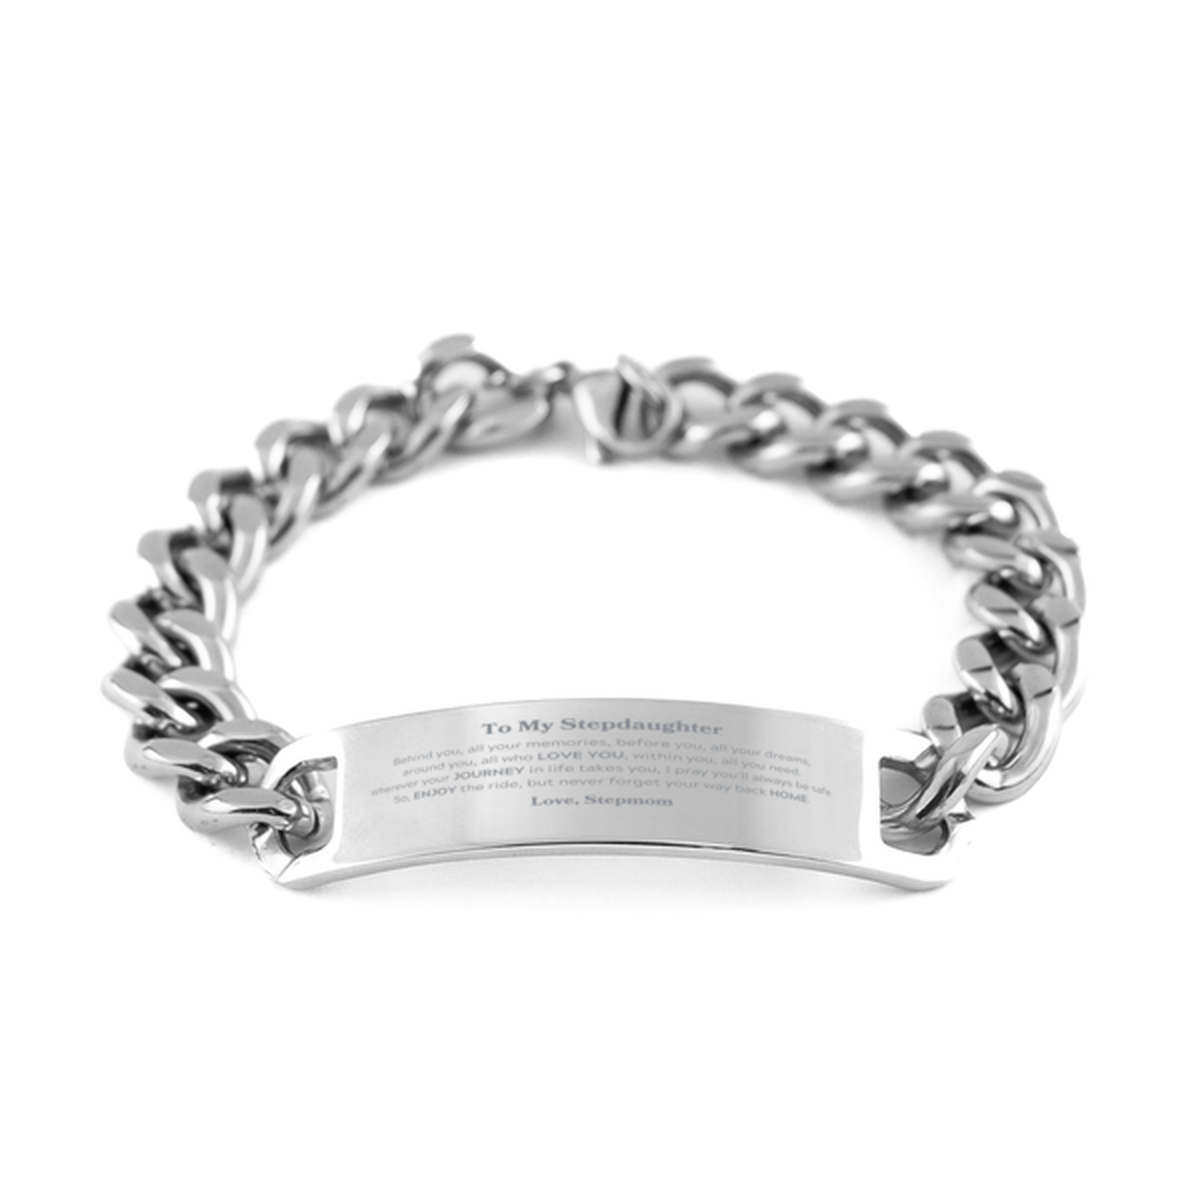 To My Stepdaughter Graduation Gifts from Stepmom, Stepdaughter Cuban Chain Stainless Steel Bracelet Christmas Birthday Gifts for Stepdaughter Behind you, all your memories, before you, all your dreams. Love, Stepmom